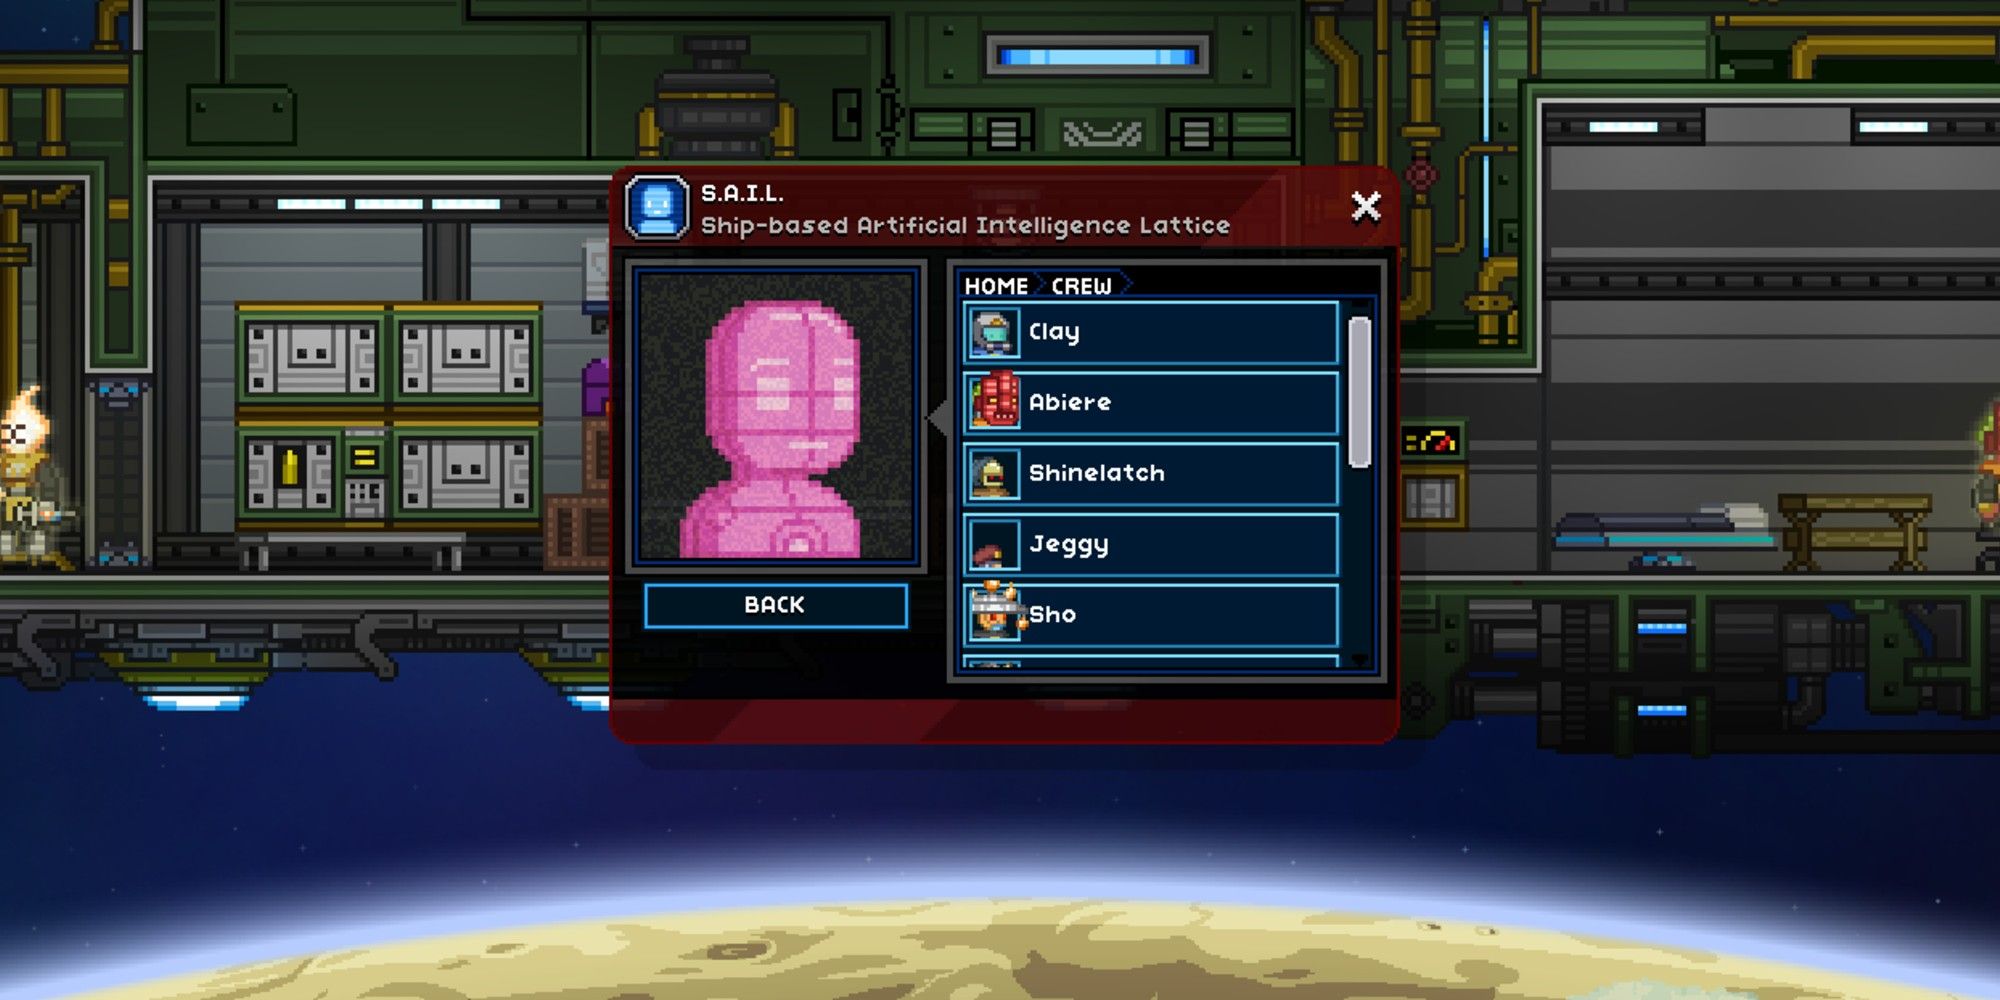 how to get a bigger ship in starbound